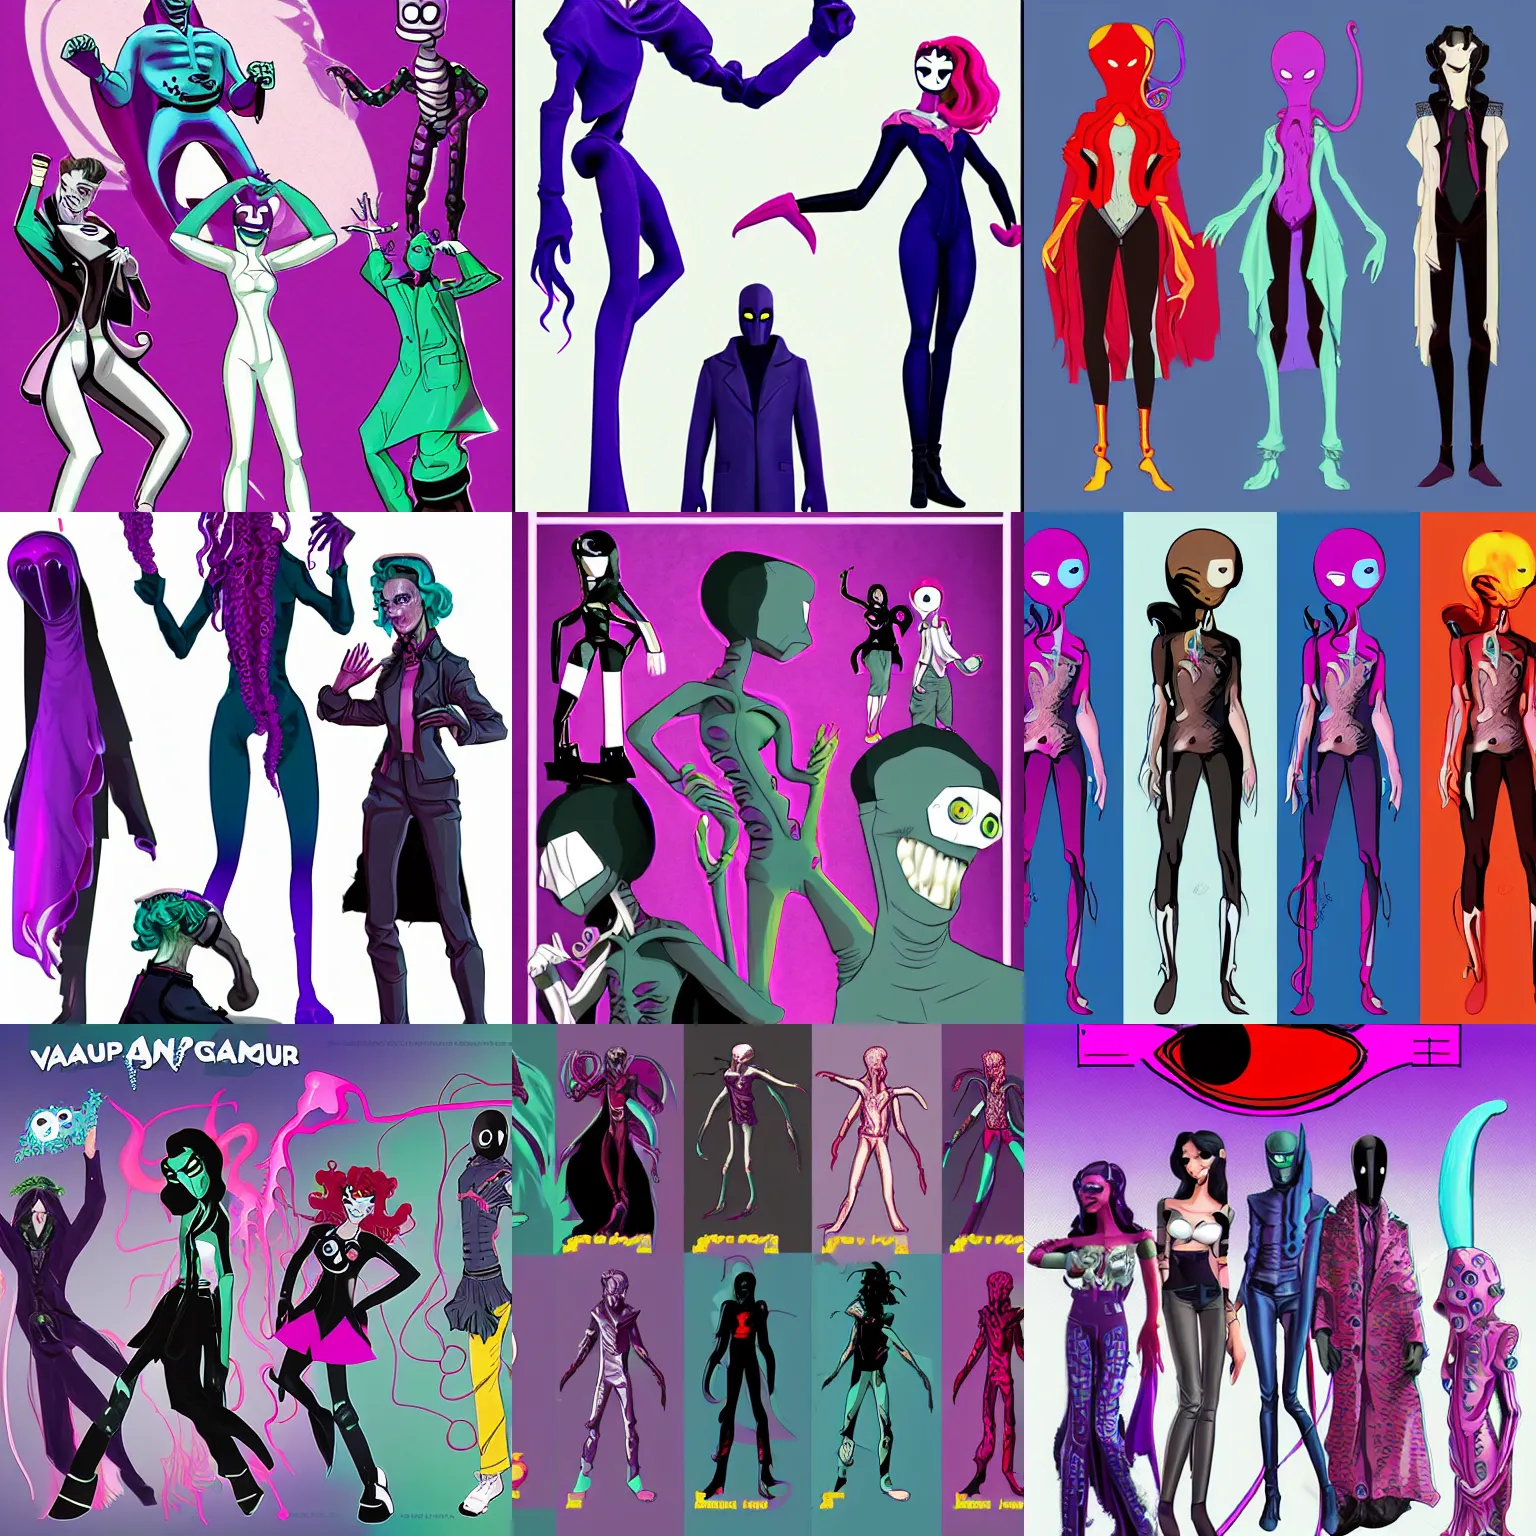 Prompt: a vintage vaporwave vampire colors tall lean vampire aliens with big black alien eyes and a squid beak with three webbed tentacle arms and skinny thin human legs wearing ninja garb based on vampire cloaks as playable characters design sheets that focuses on an ocean setting with help Lauren faust from her work on dc superhero girls and lead artist Andy Suriano from rise of the teenage mutant ninja turtles on nickelodeon using artistic cues for the game fret nice and art direction from the Sony 2018 animated film spiderverse